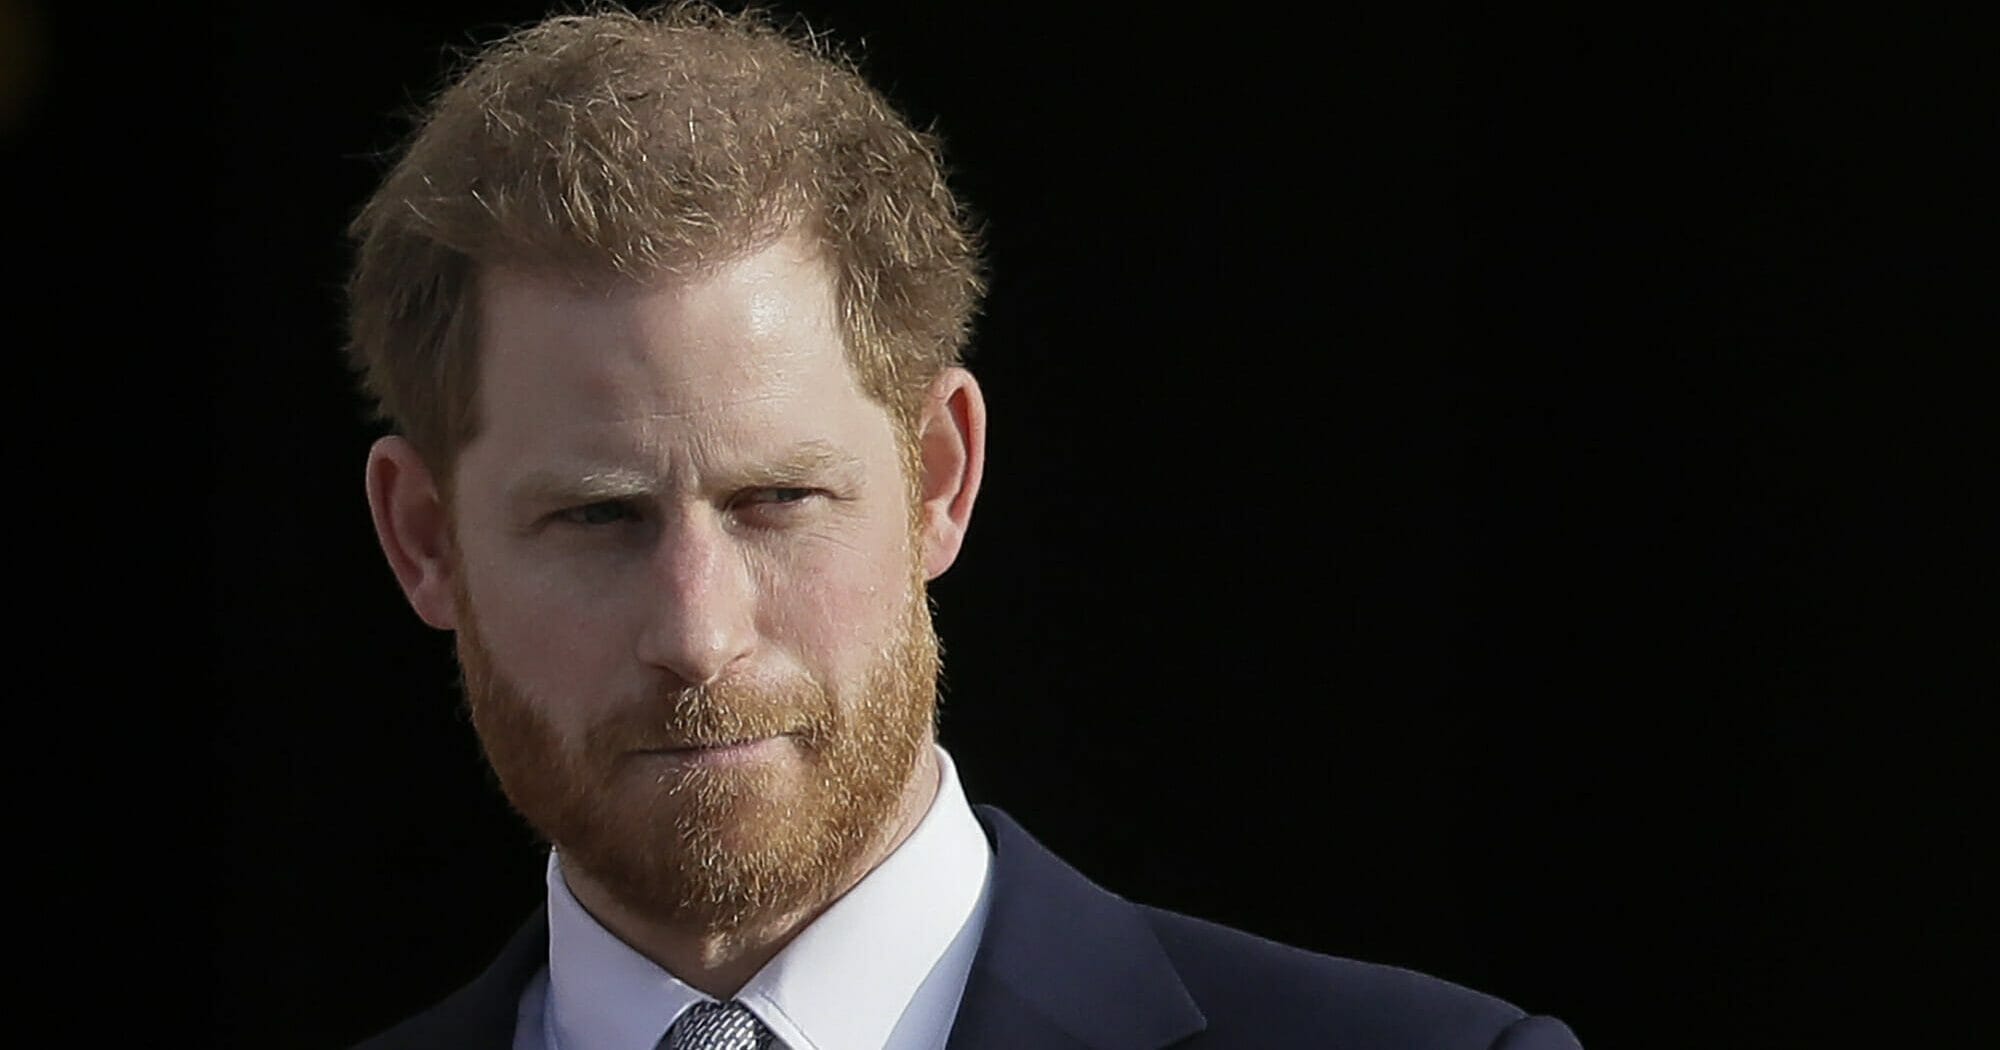 Britain's Prince Harry arrives in the gardens of Buckingham Palace in London on Jan. 16, 2020.